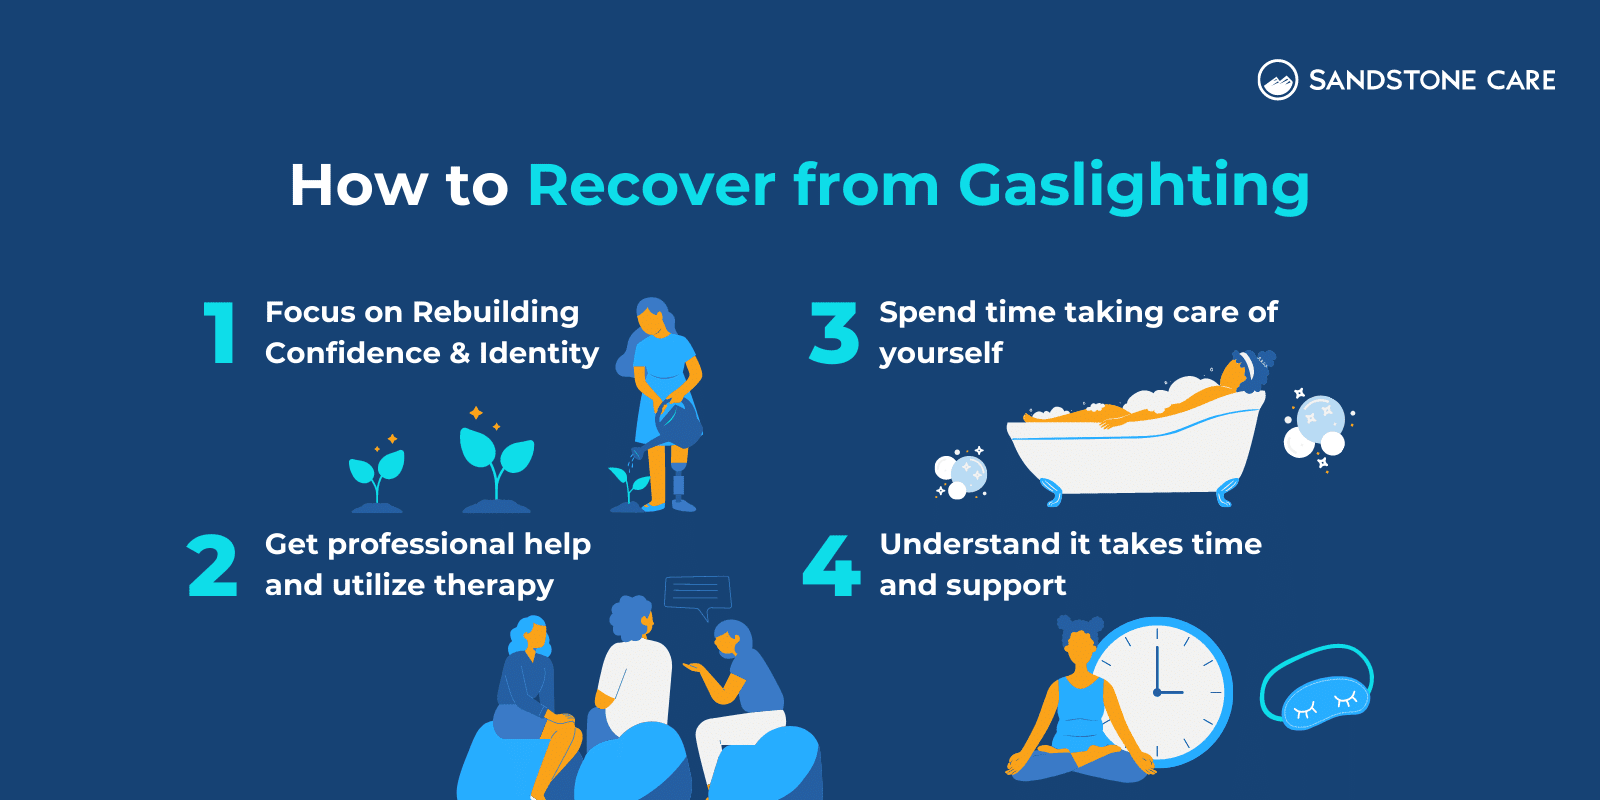 4 Tips to recover from gaslighting represented with relevant illustrations